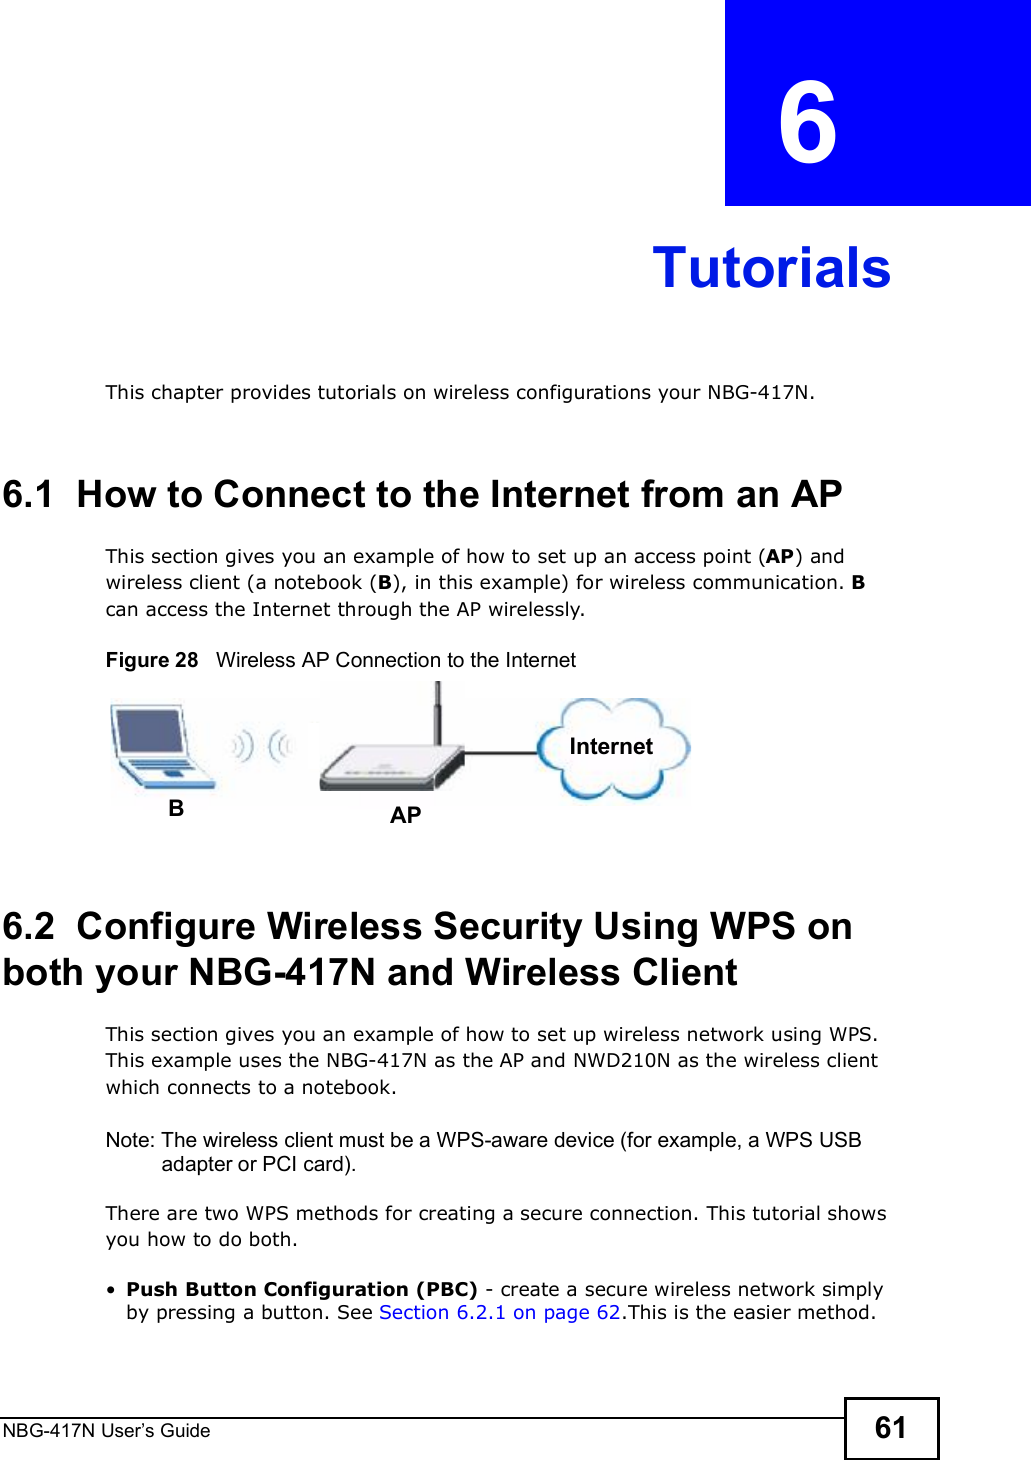 NBG-417N User s Guide 61CHAPTER  6 TutorialsThis chapter provides tutorials on wireless configurations your NBG-417N.6.1  How to Connect to the Internet from an APThis section gives you an example of how to set up an access point (AP) and wireless client (a notebook (B), in this example) for wireless communication. B can access the Internet through the AP wirelessly.Figure 28   Wireless AP Connection to the Internet6.2  Configure Wireless Security Using WPS on both your NBG-417N and Wireless ClientThis section gives you an example of how to set up wireless network using WPS. This example uses the NBG-417N as the AP and NWD210N as the wireless client which connects to a notebook. Note: The wireless client must be a WPS-aware device (for example, a WPS USB adapter or PCI card).There are two WPS methods for creating a secure connection. This tutorial shows you how to do both. Push Button Configuration (PBC) - create a secure wireless network simply by pressing a button. See Section 6.2.1 on page 62.This is the easier method.BAPInternet